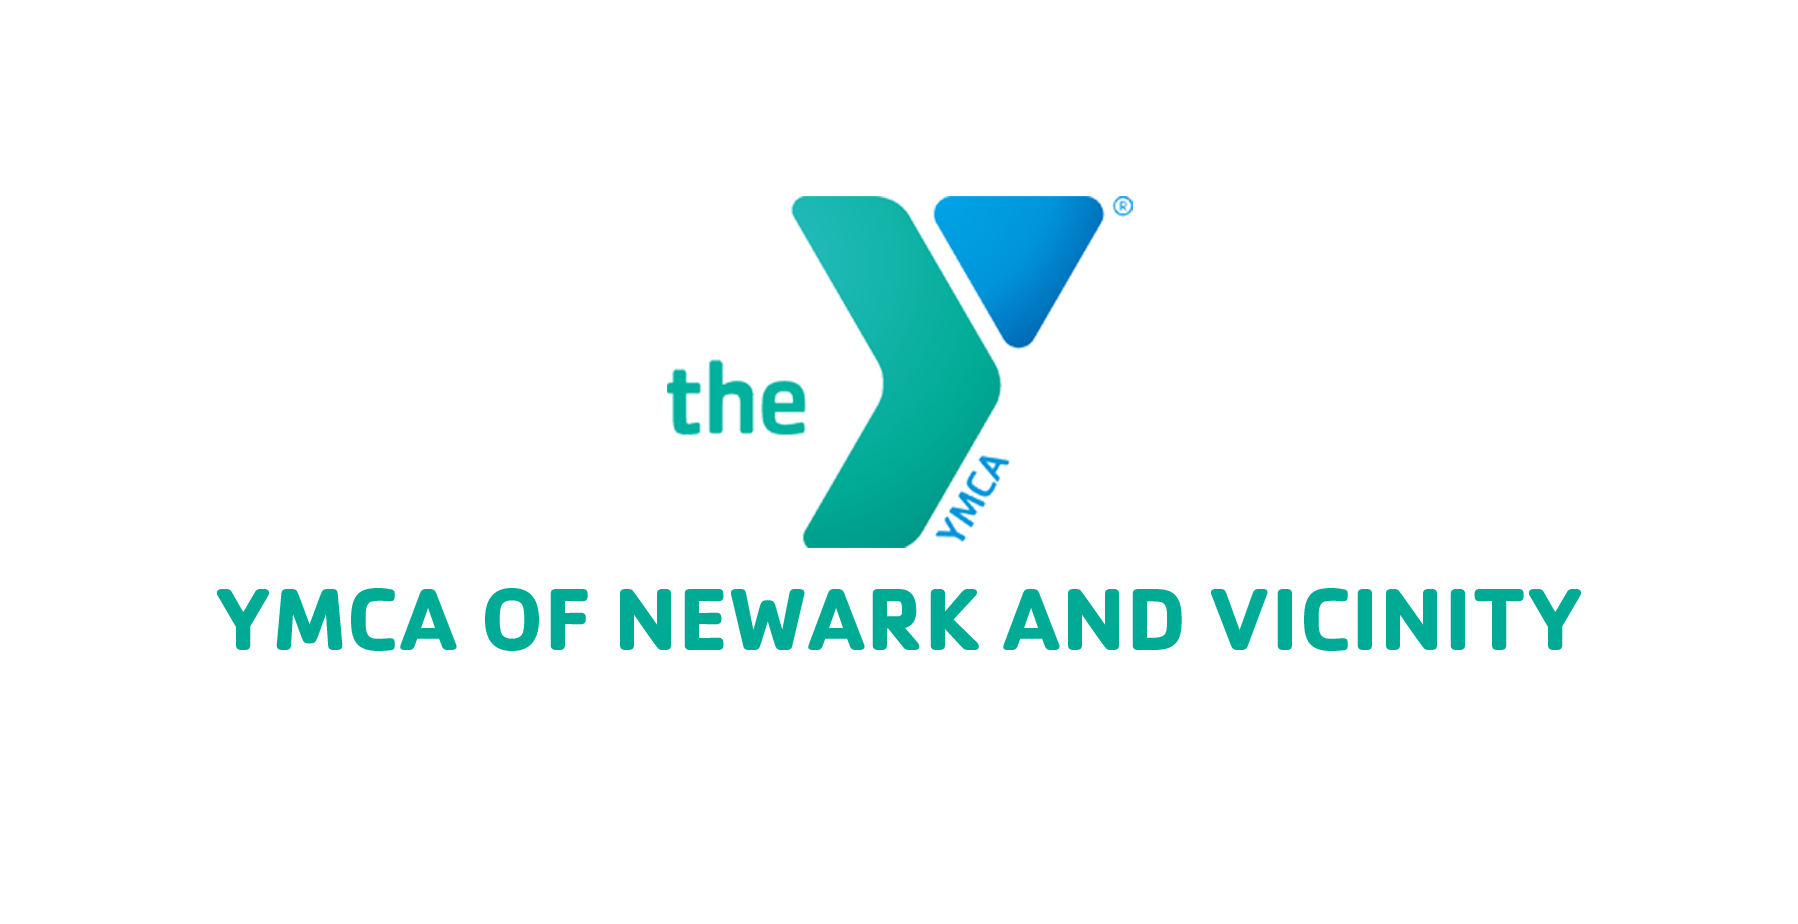 YMCA OF NEWARK AND VICINITY